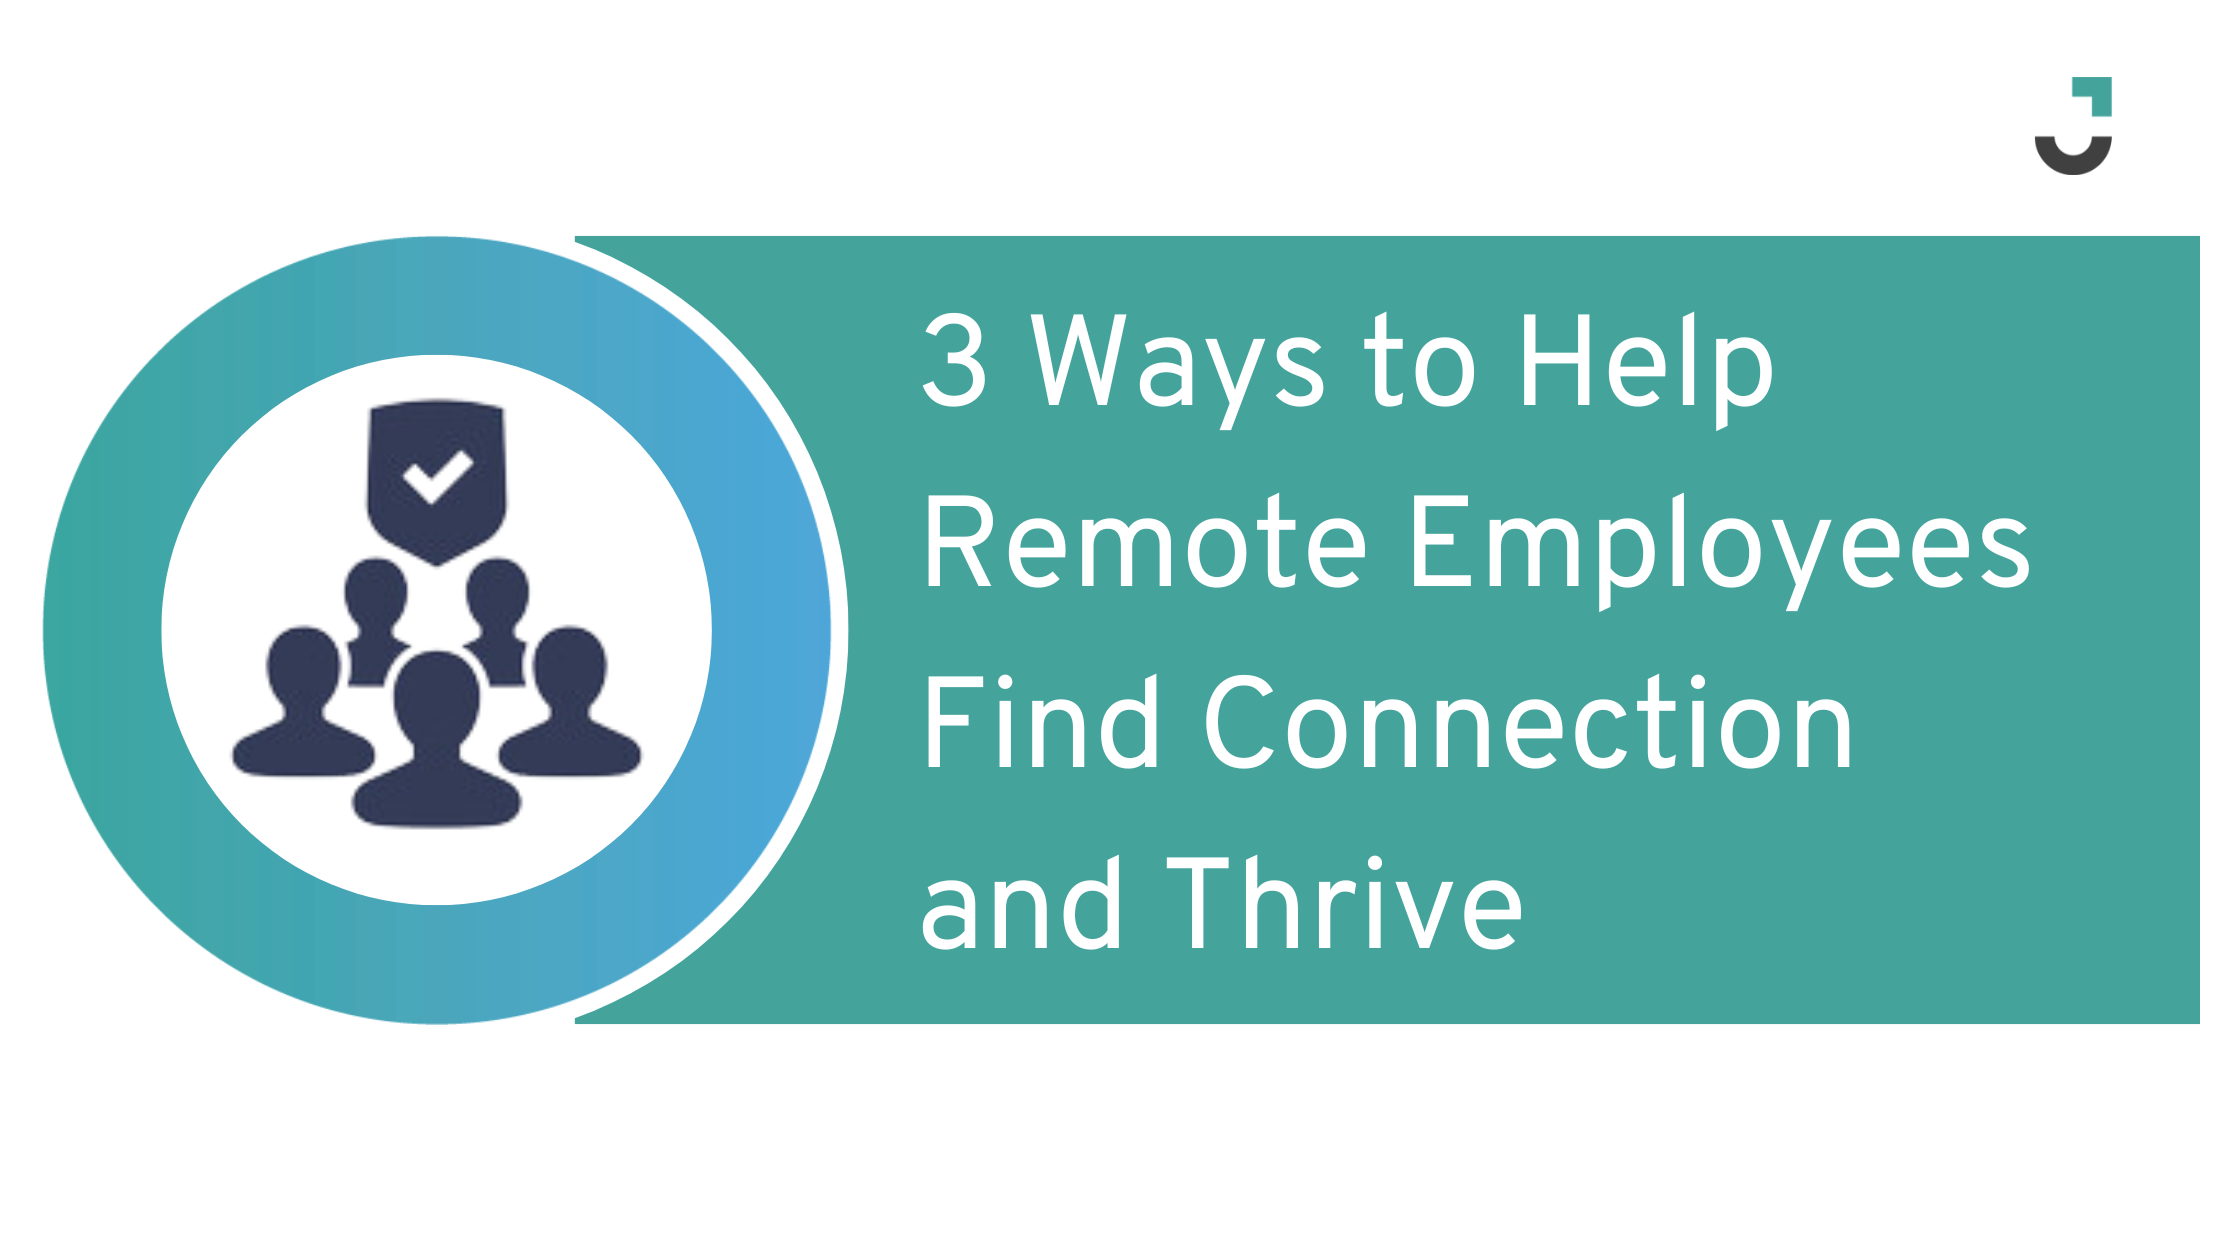 3 Ways to Help Remote Employees Find Connection and Thrive